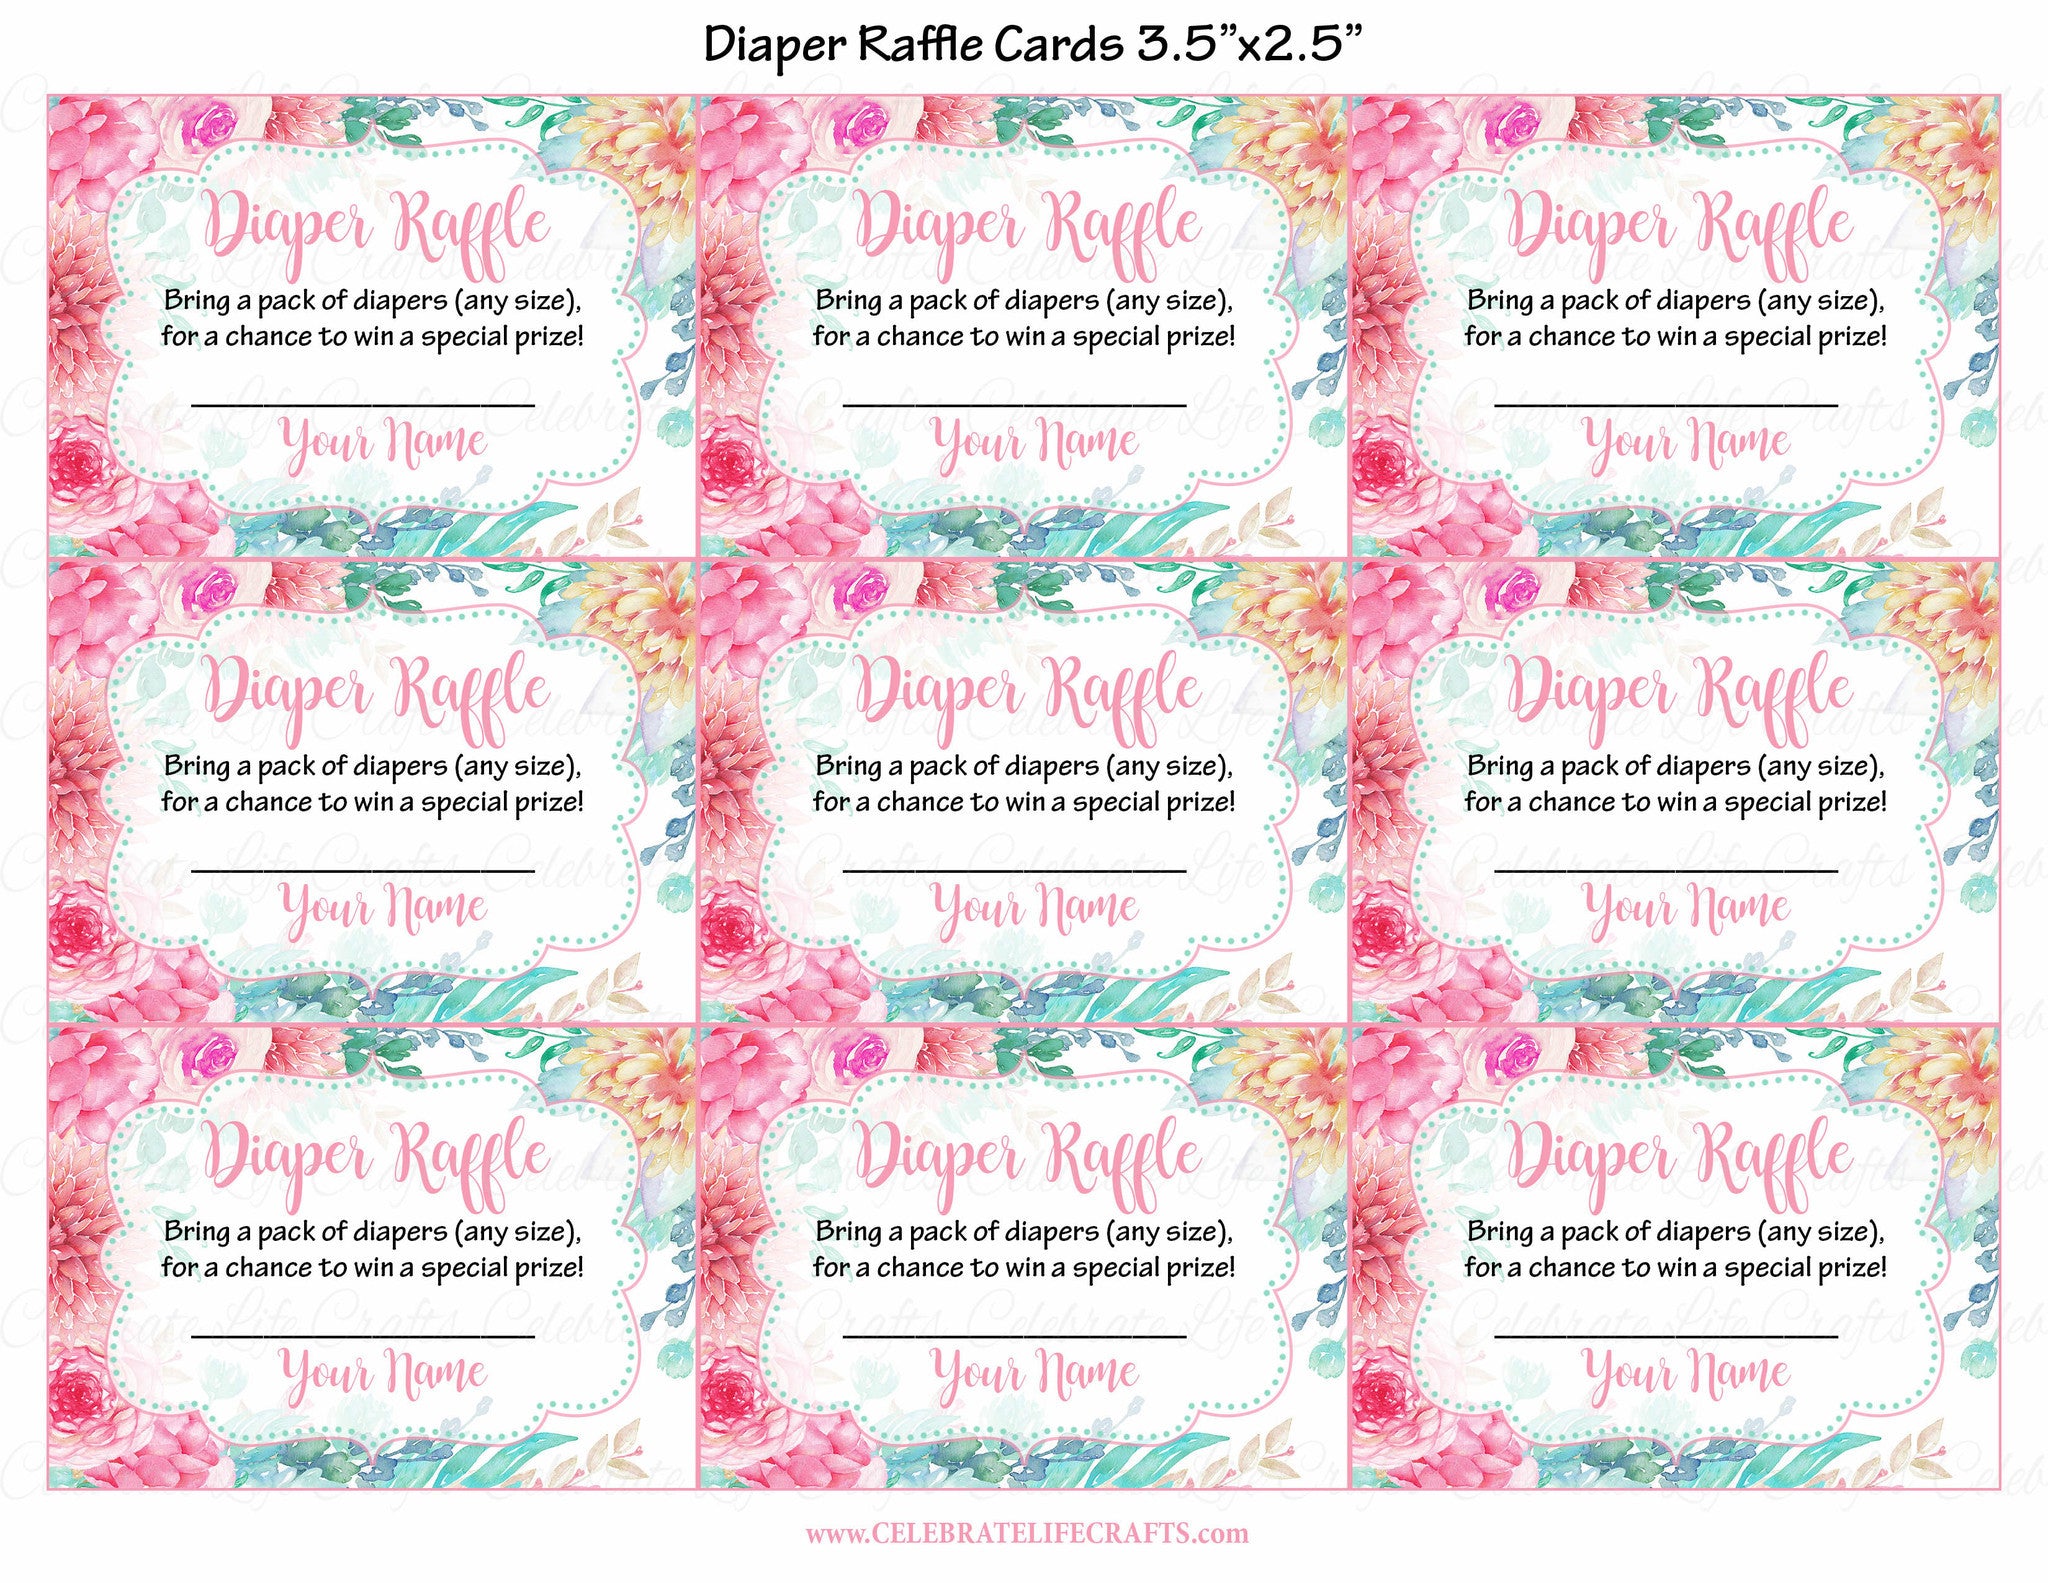 diaper-raffle-tickets-for-baby-shower-spring-baby-shower-theme-for-baby-girl-pink-floral